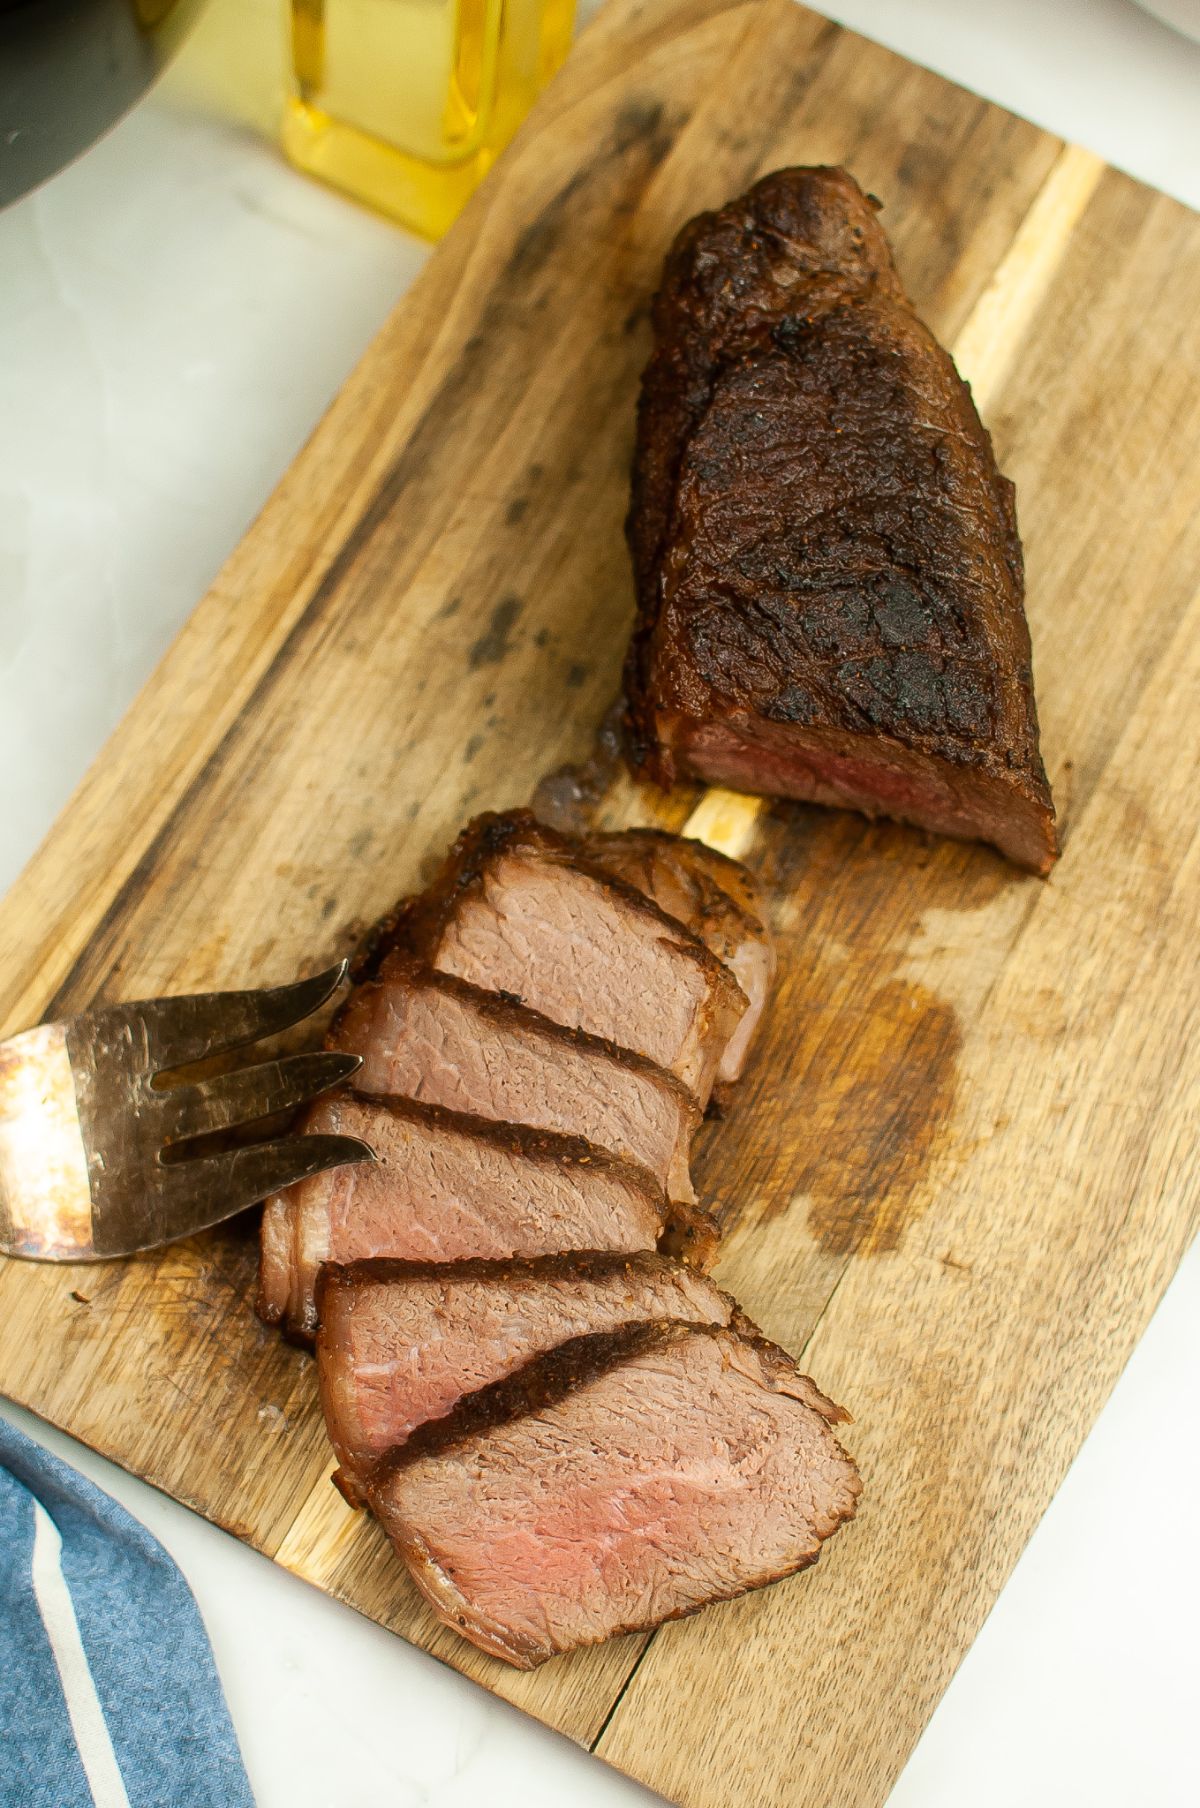 Sliced beef roast on a wooden chopping board with serving fork on the side.